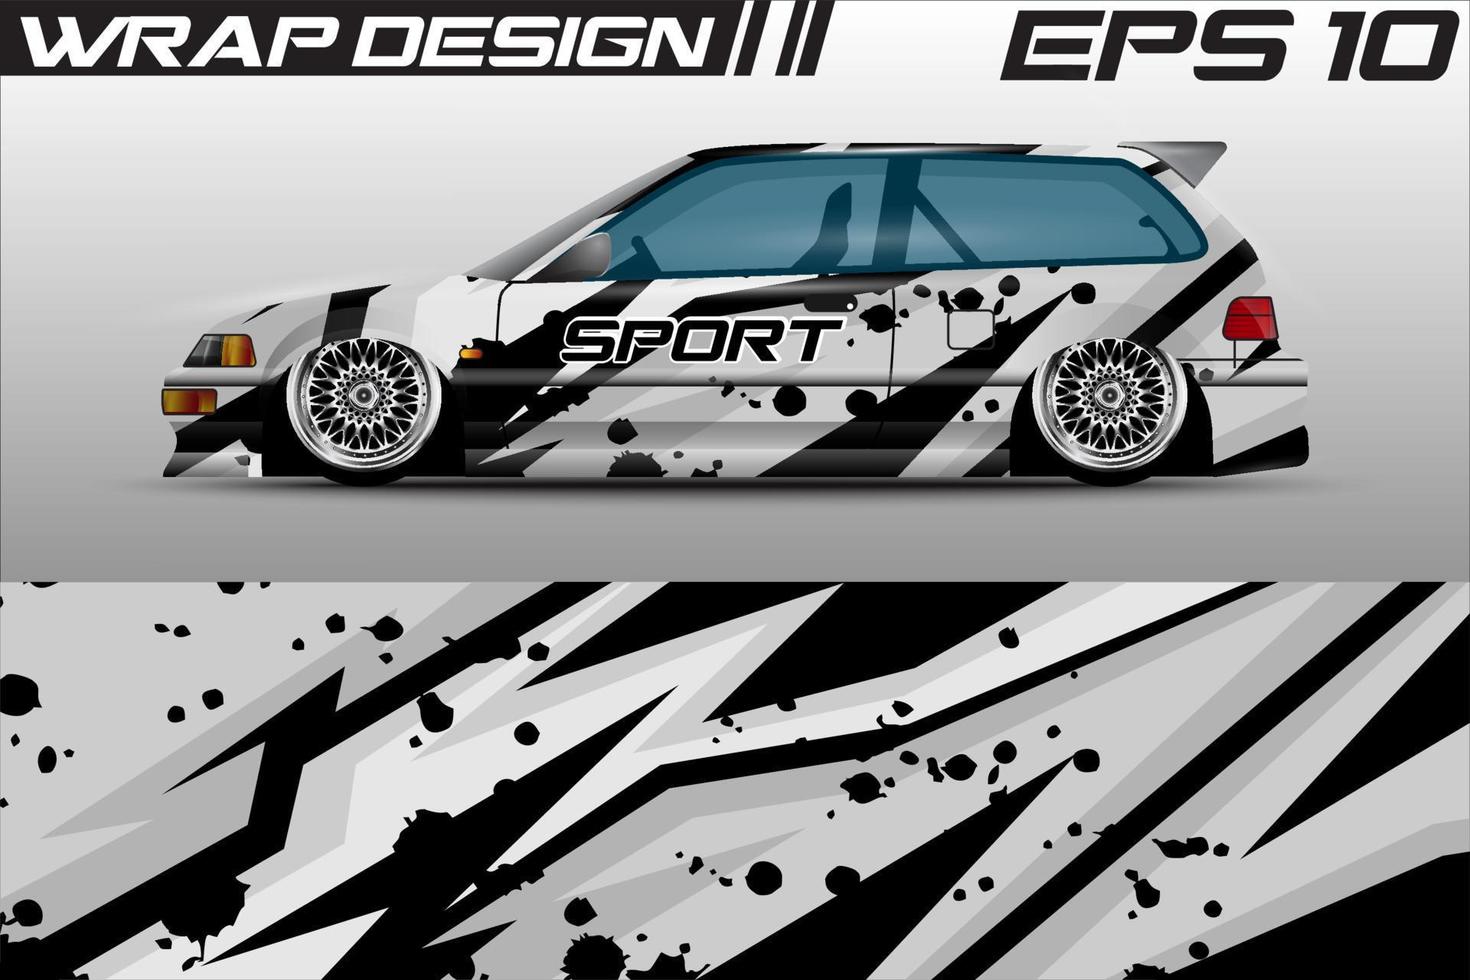 Livery design wrap racing car. Abstract background for racing livery or daily use car vinyl sticker. full vector. vector